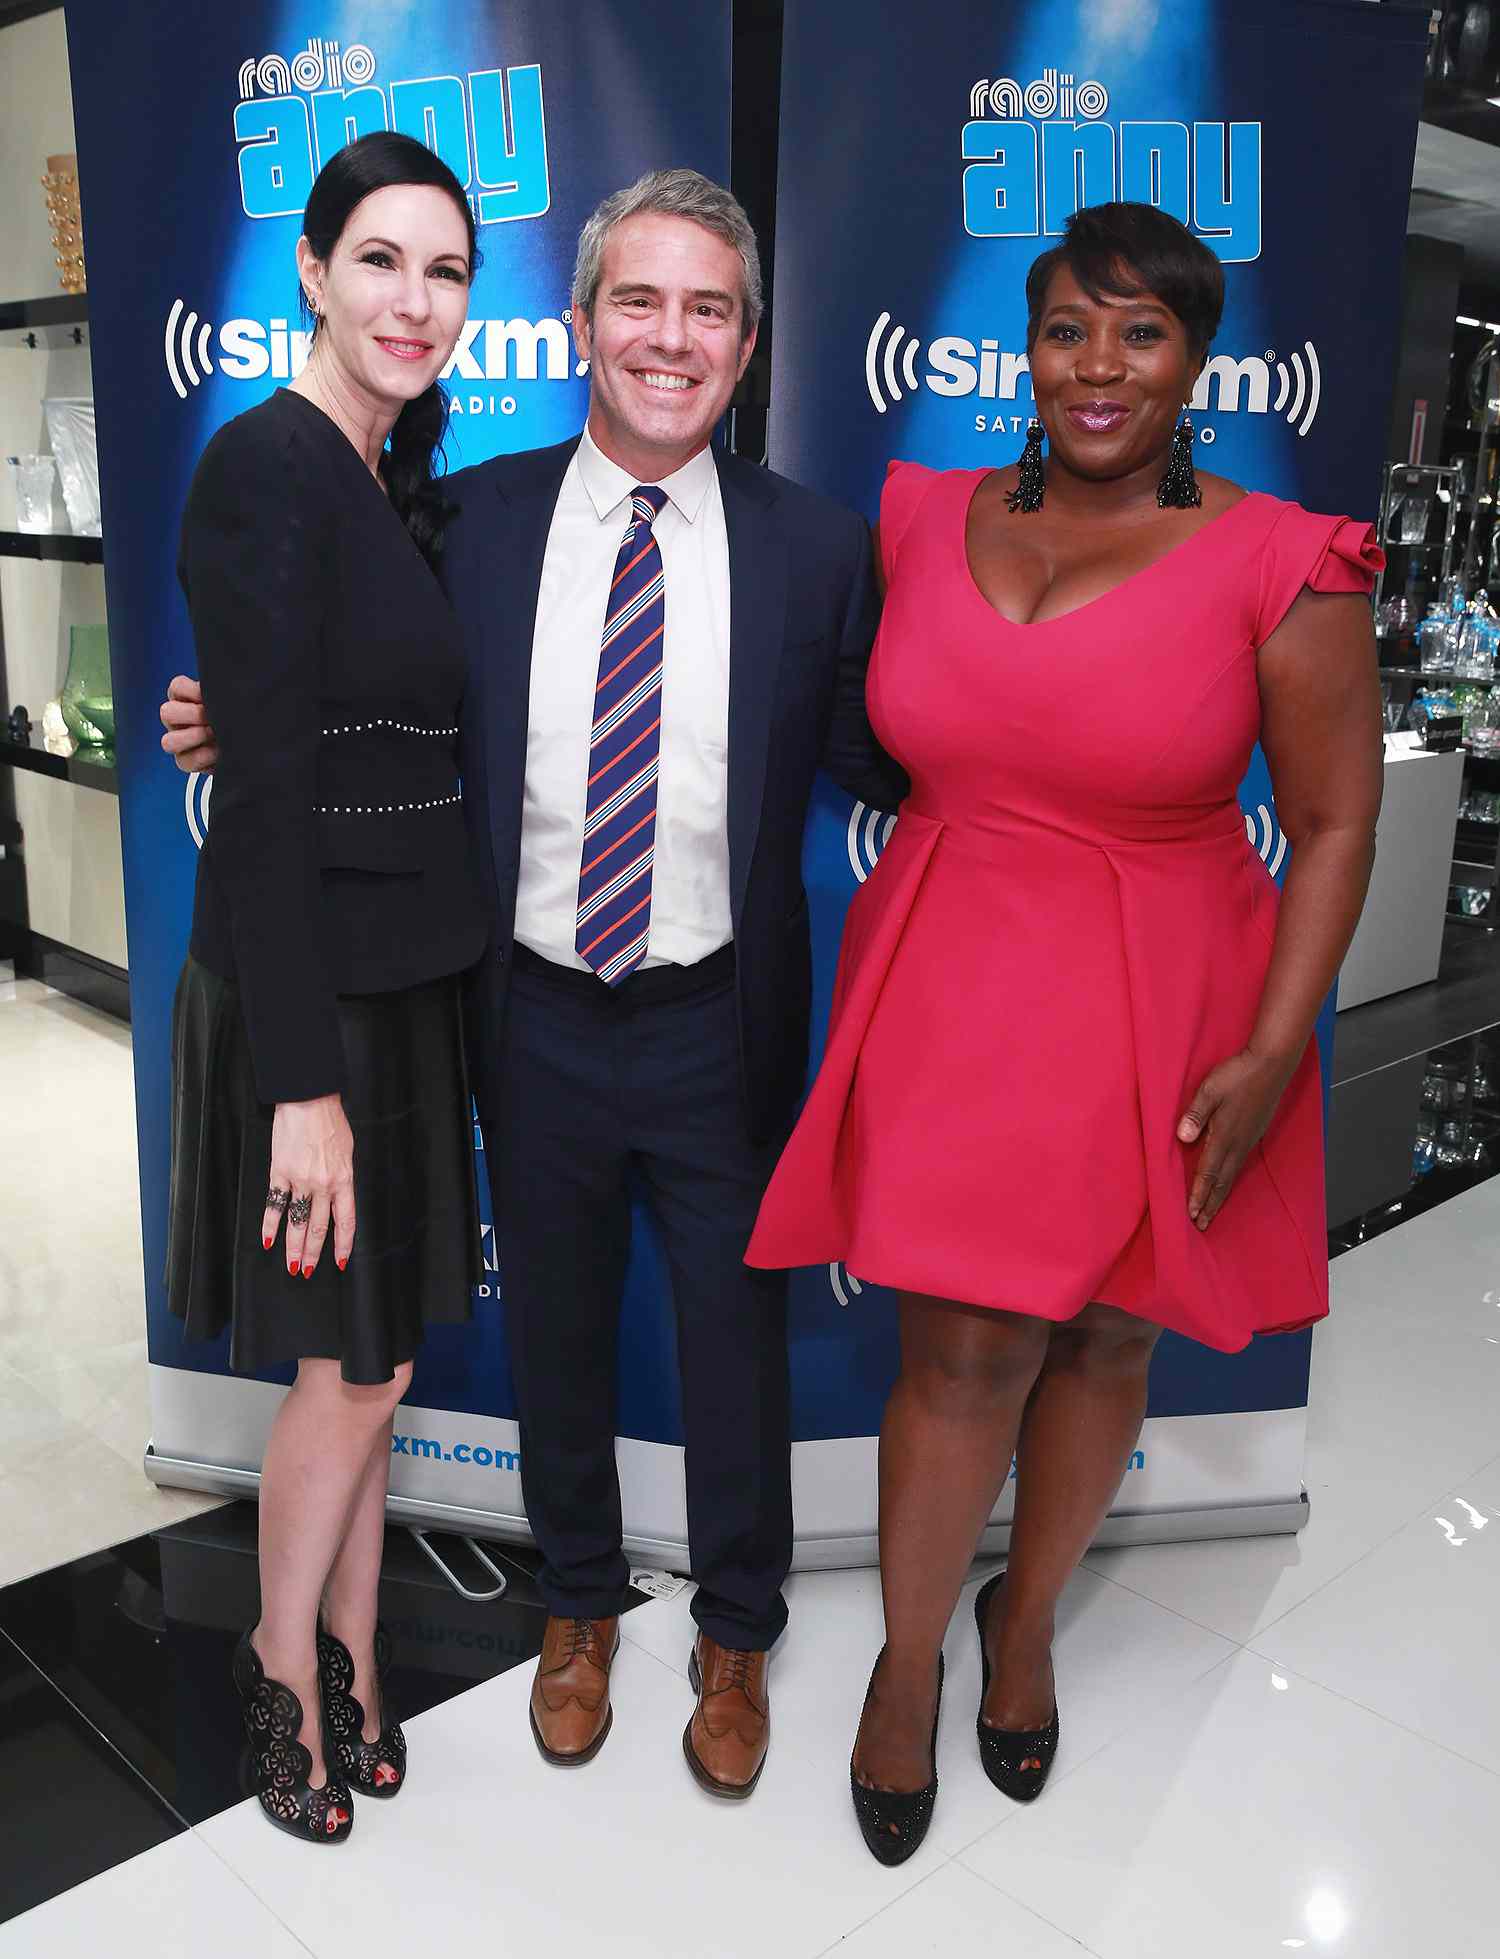 SiriusXM Host Bevy Smith Hosts A Radio Special Celebrating The Anniversary Of Andy Cohen's SiriusXM Channel Radio Andy At Bloomingdale's In New York City